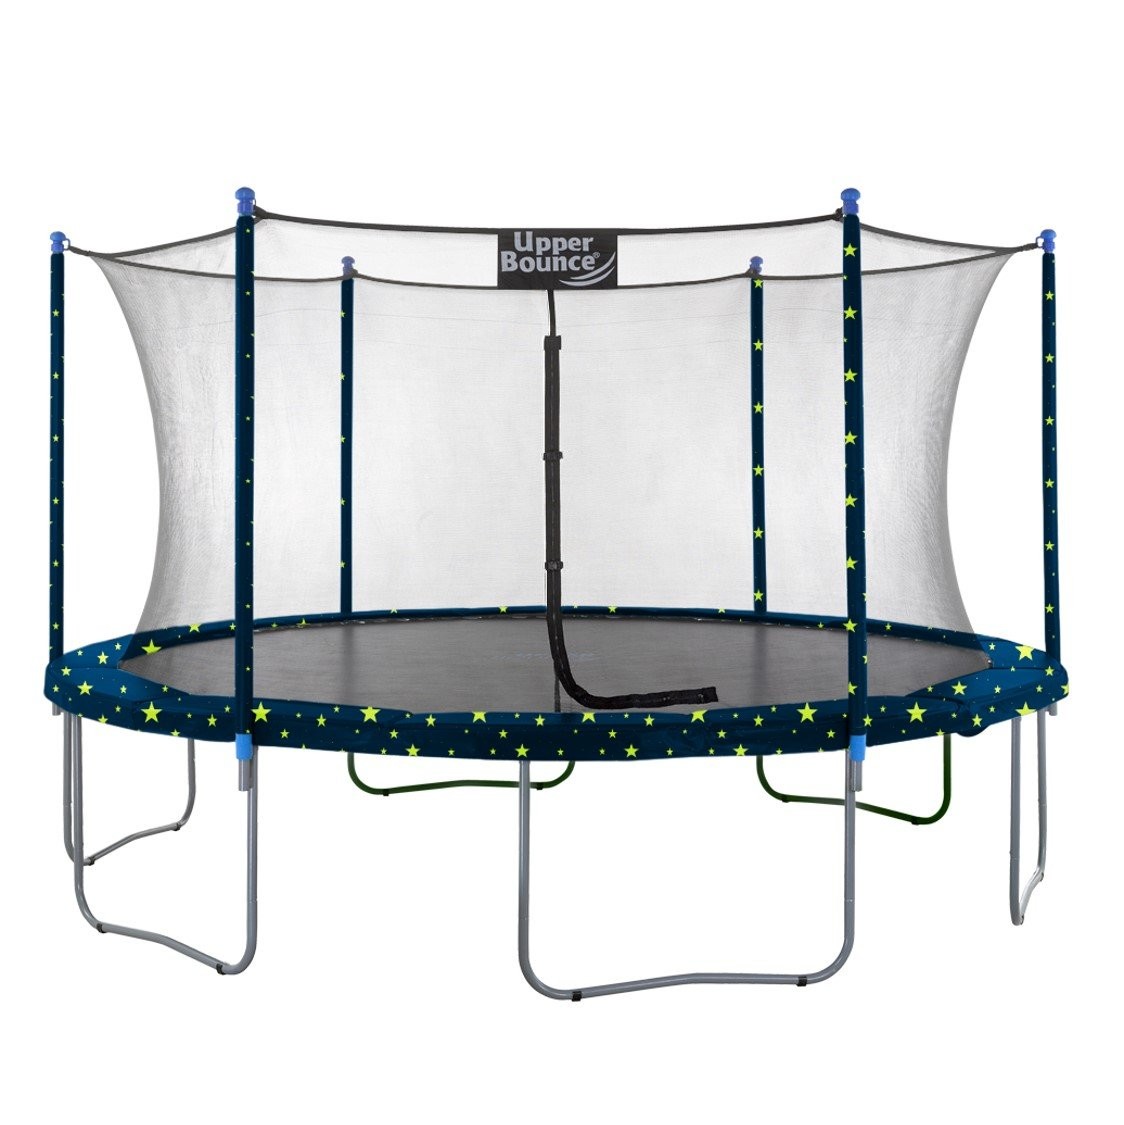 14Ft Large Trampoline and Enclosure Set | Garden & Outdoor Trampoline with Safety Net, Mat, Pad | Starry Night